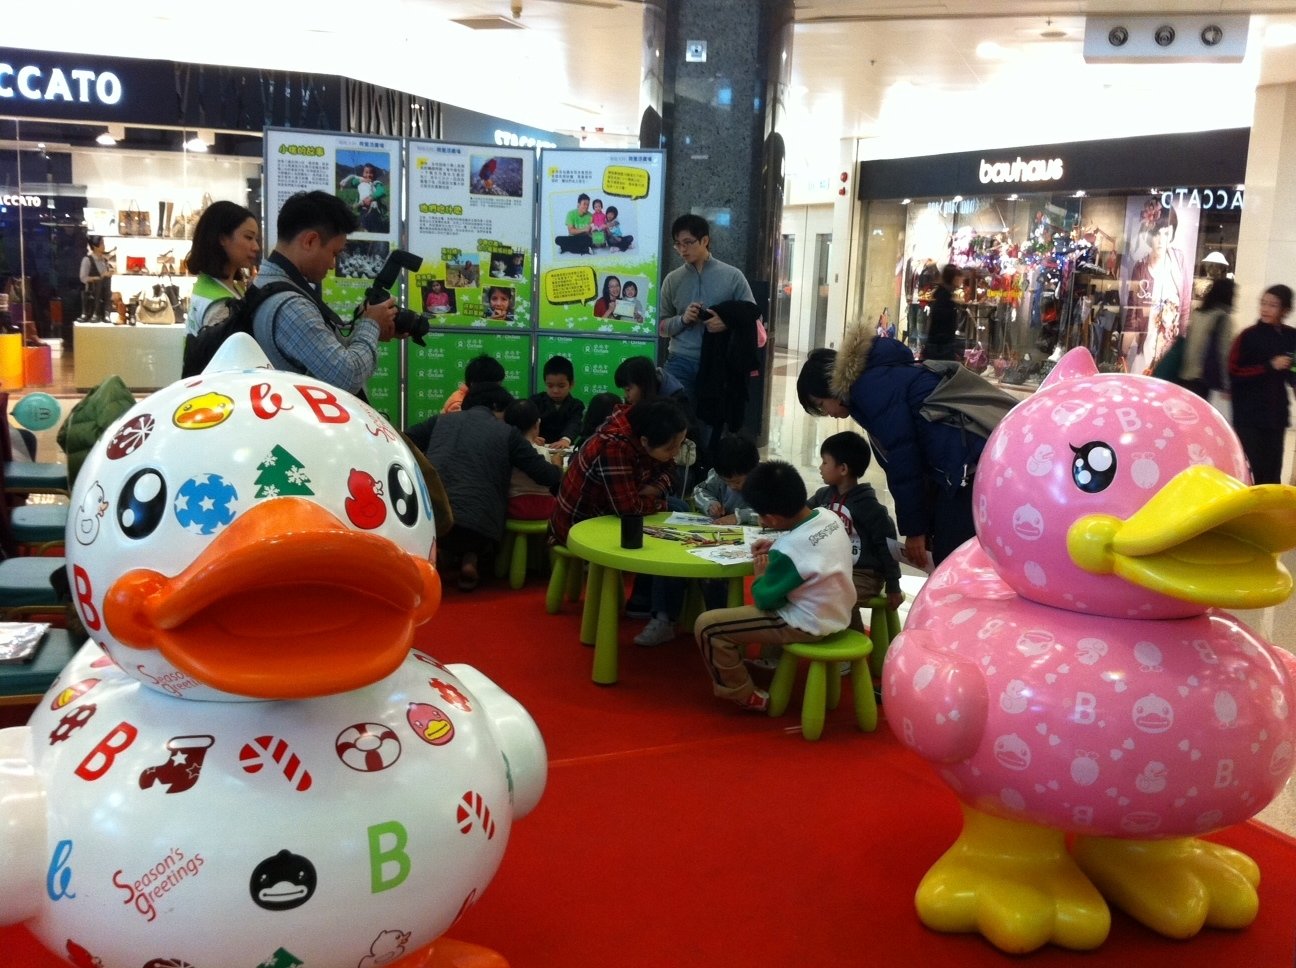 Oxfam Hong Kong & B.Duck Coloring activities and exhibitions